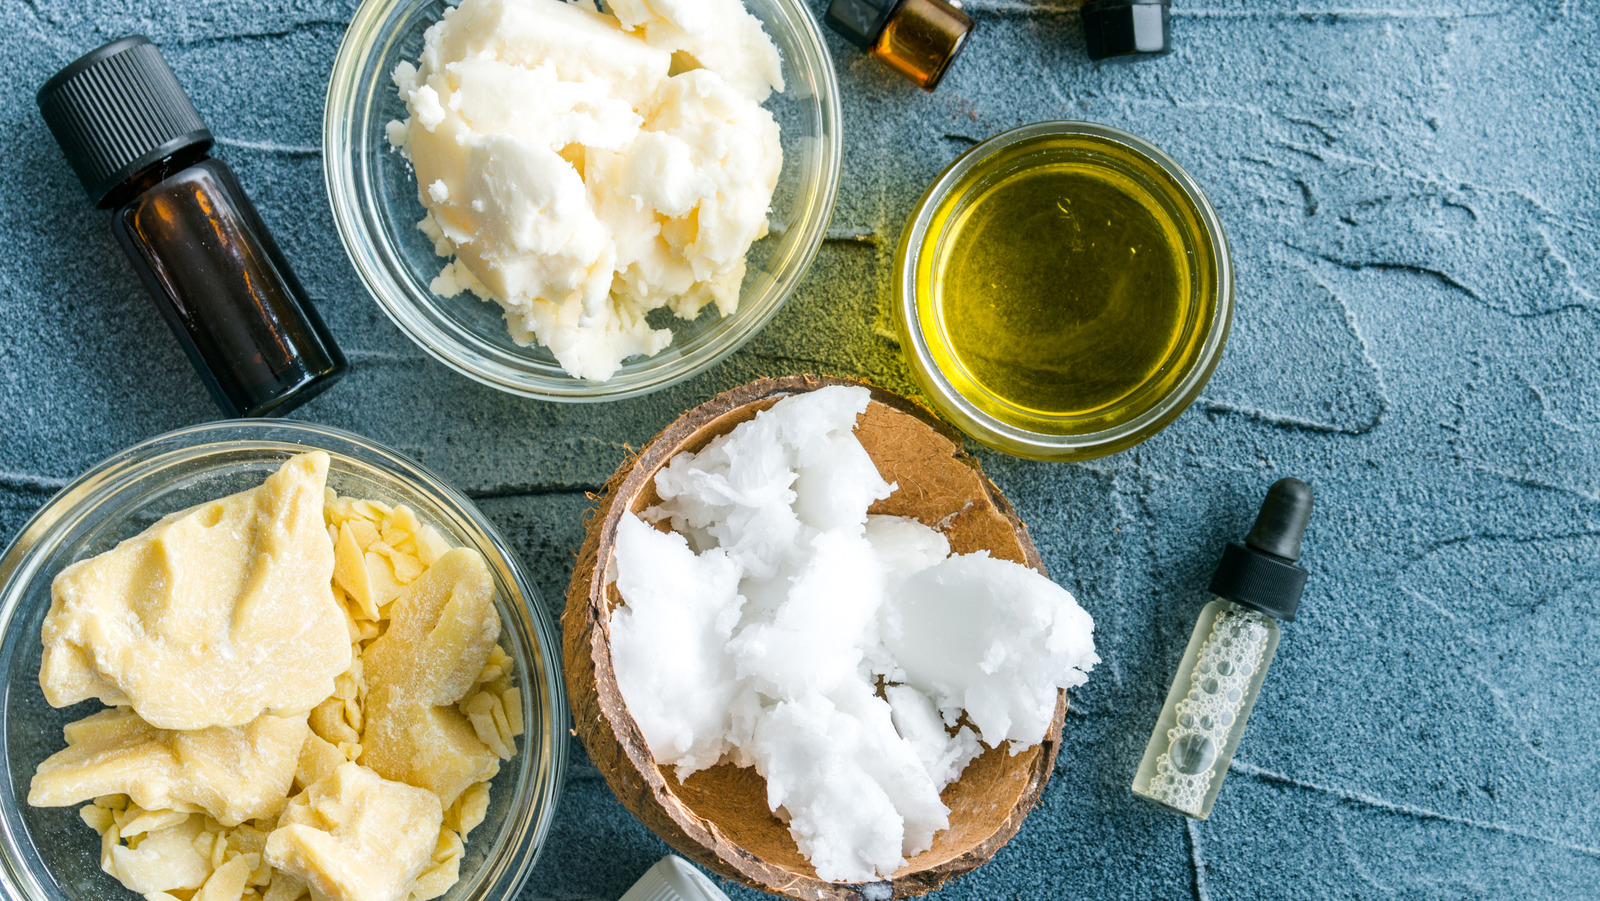 Shea Butter And Coconut Oil Are Ultra-Moisturizing, But They Can Also Have Sneaky Side Effects photo